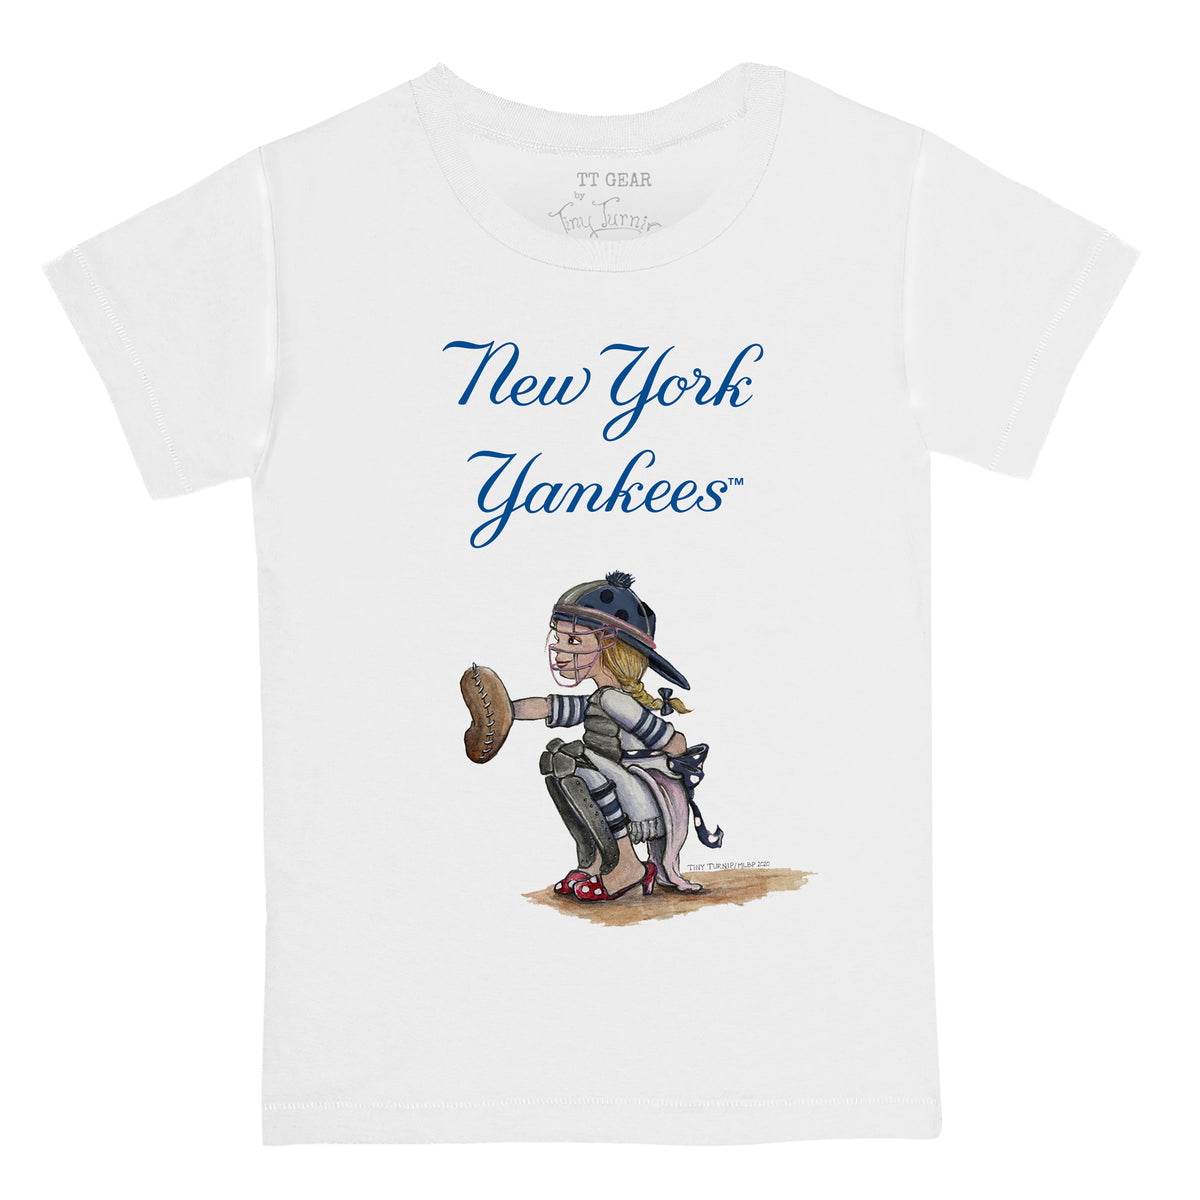 New York Yankees Kate The Catcher Tee Shirt Youth XL (12-14) / White